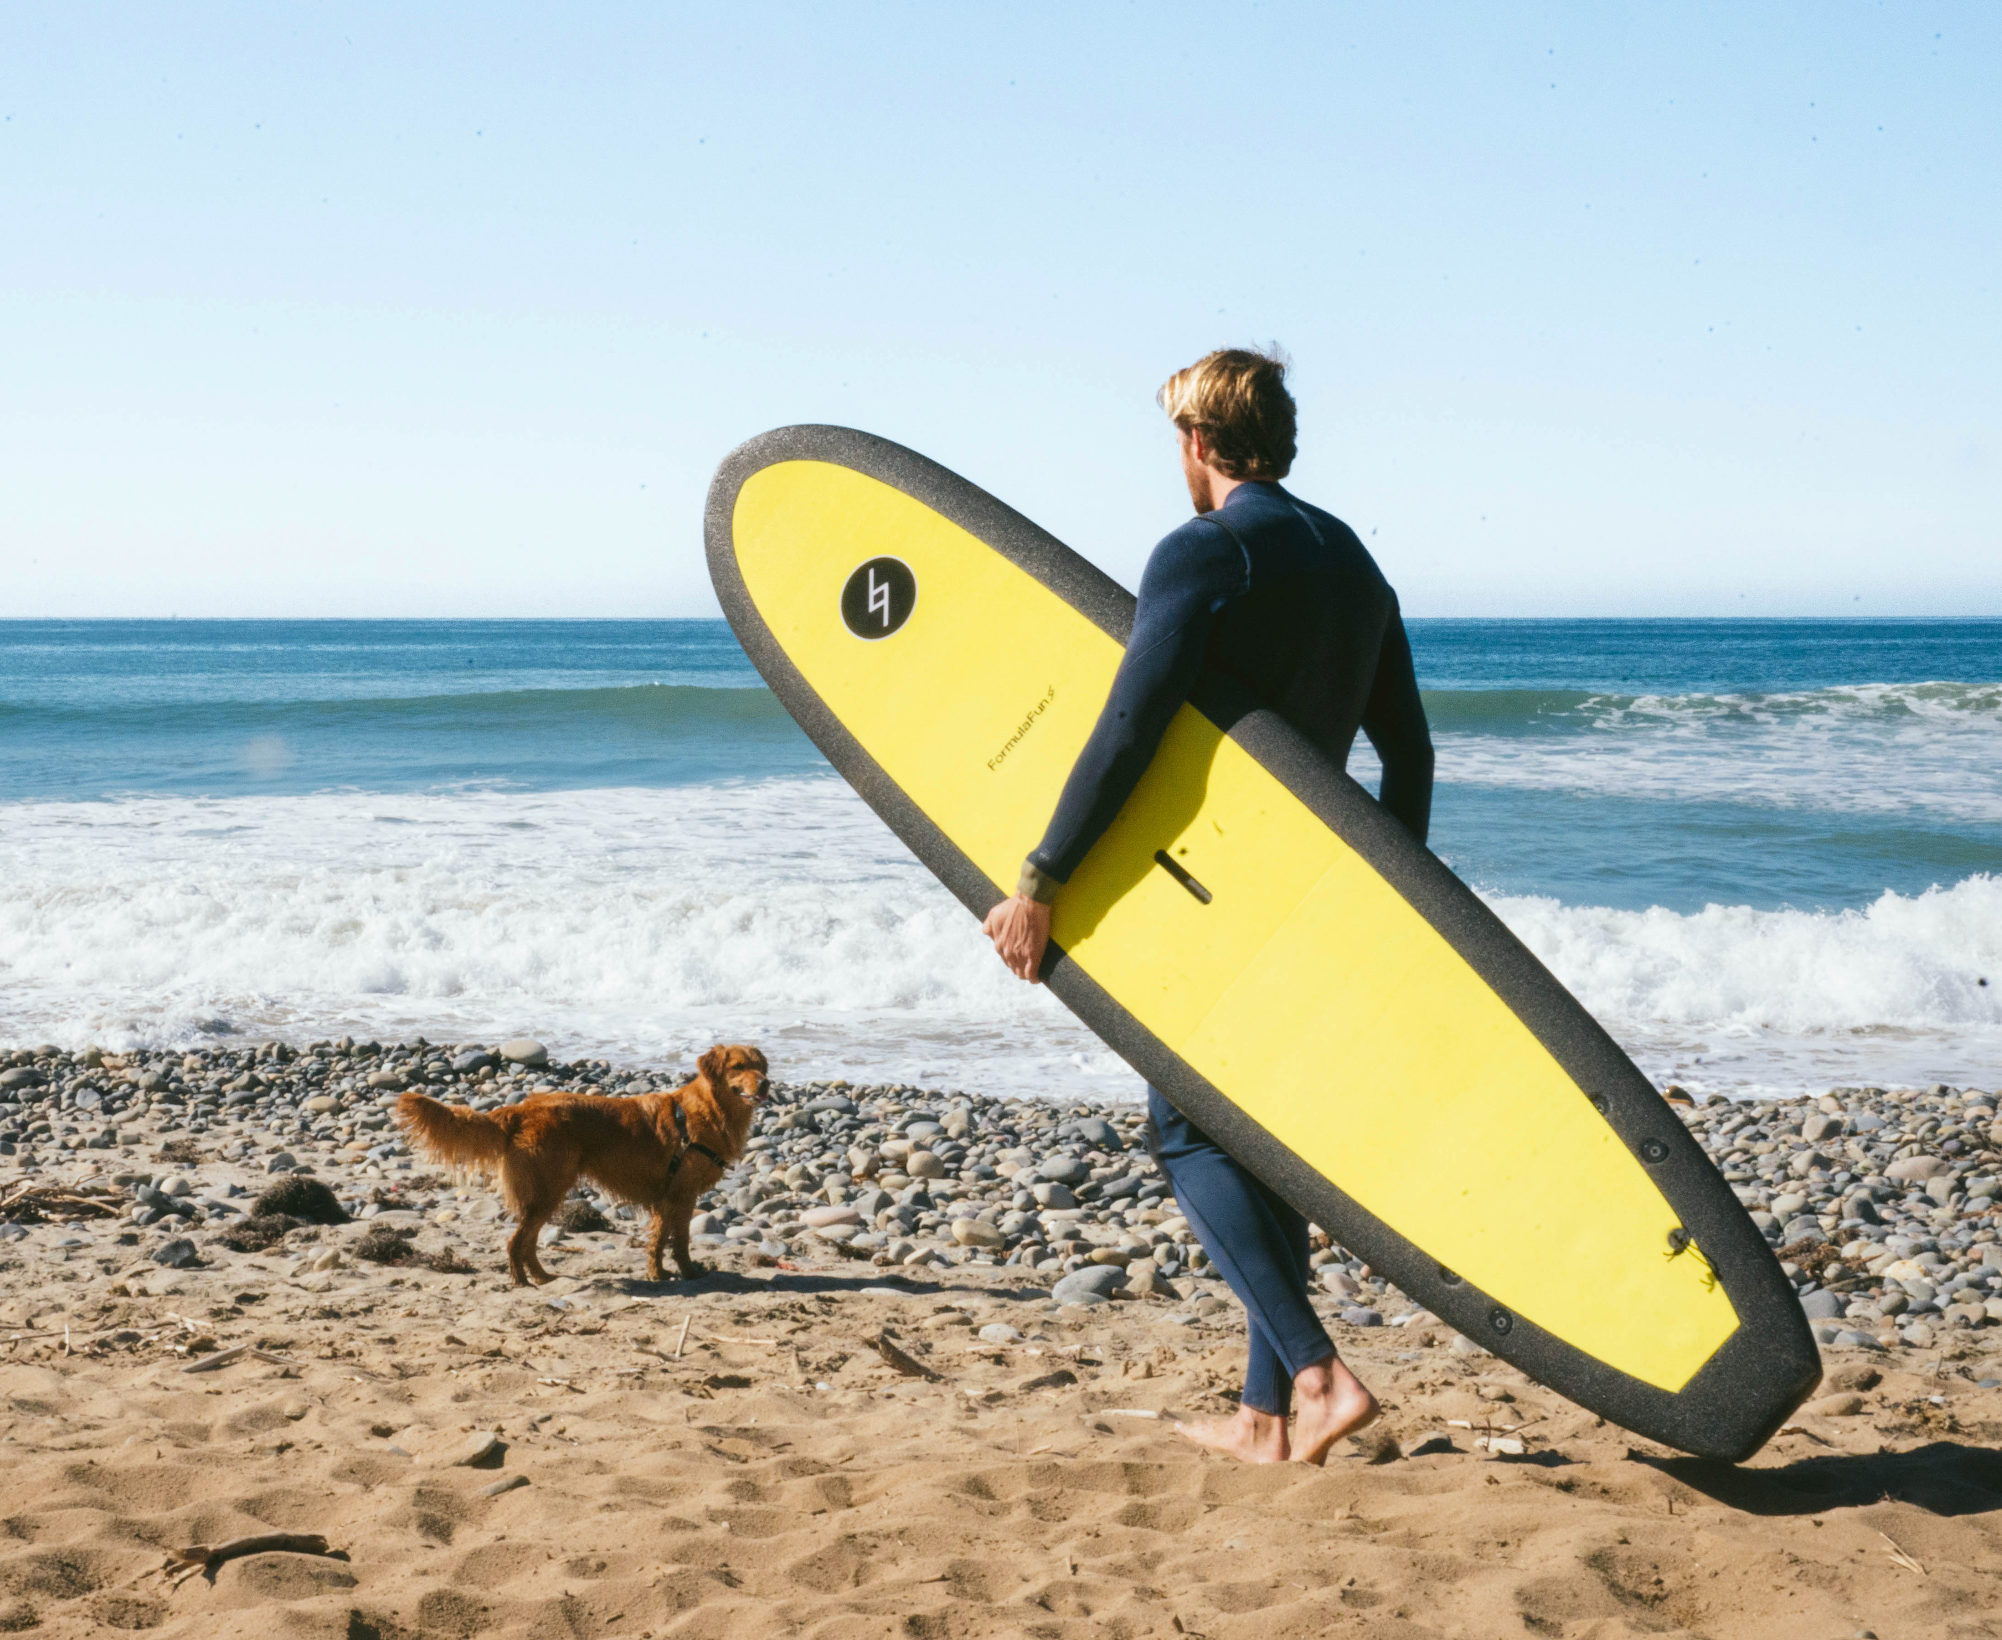 A man and a dog on a beach with a yellow 7 foot 10 inch Formula Fun Foamies DOHO surfboard